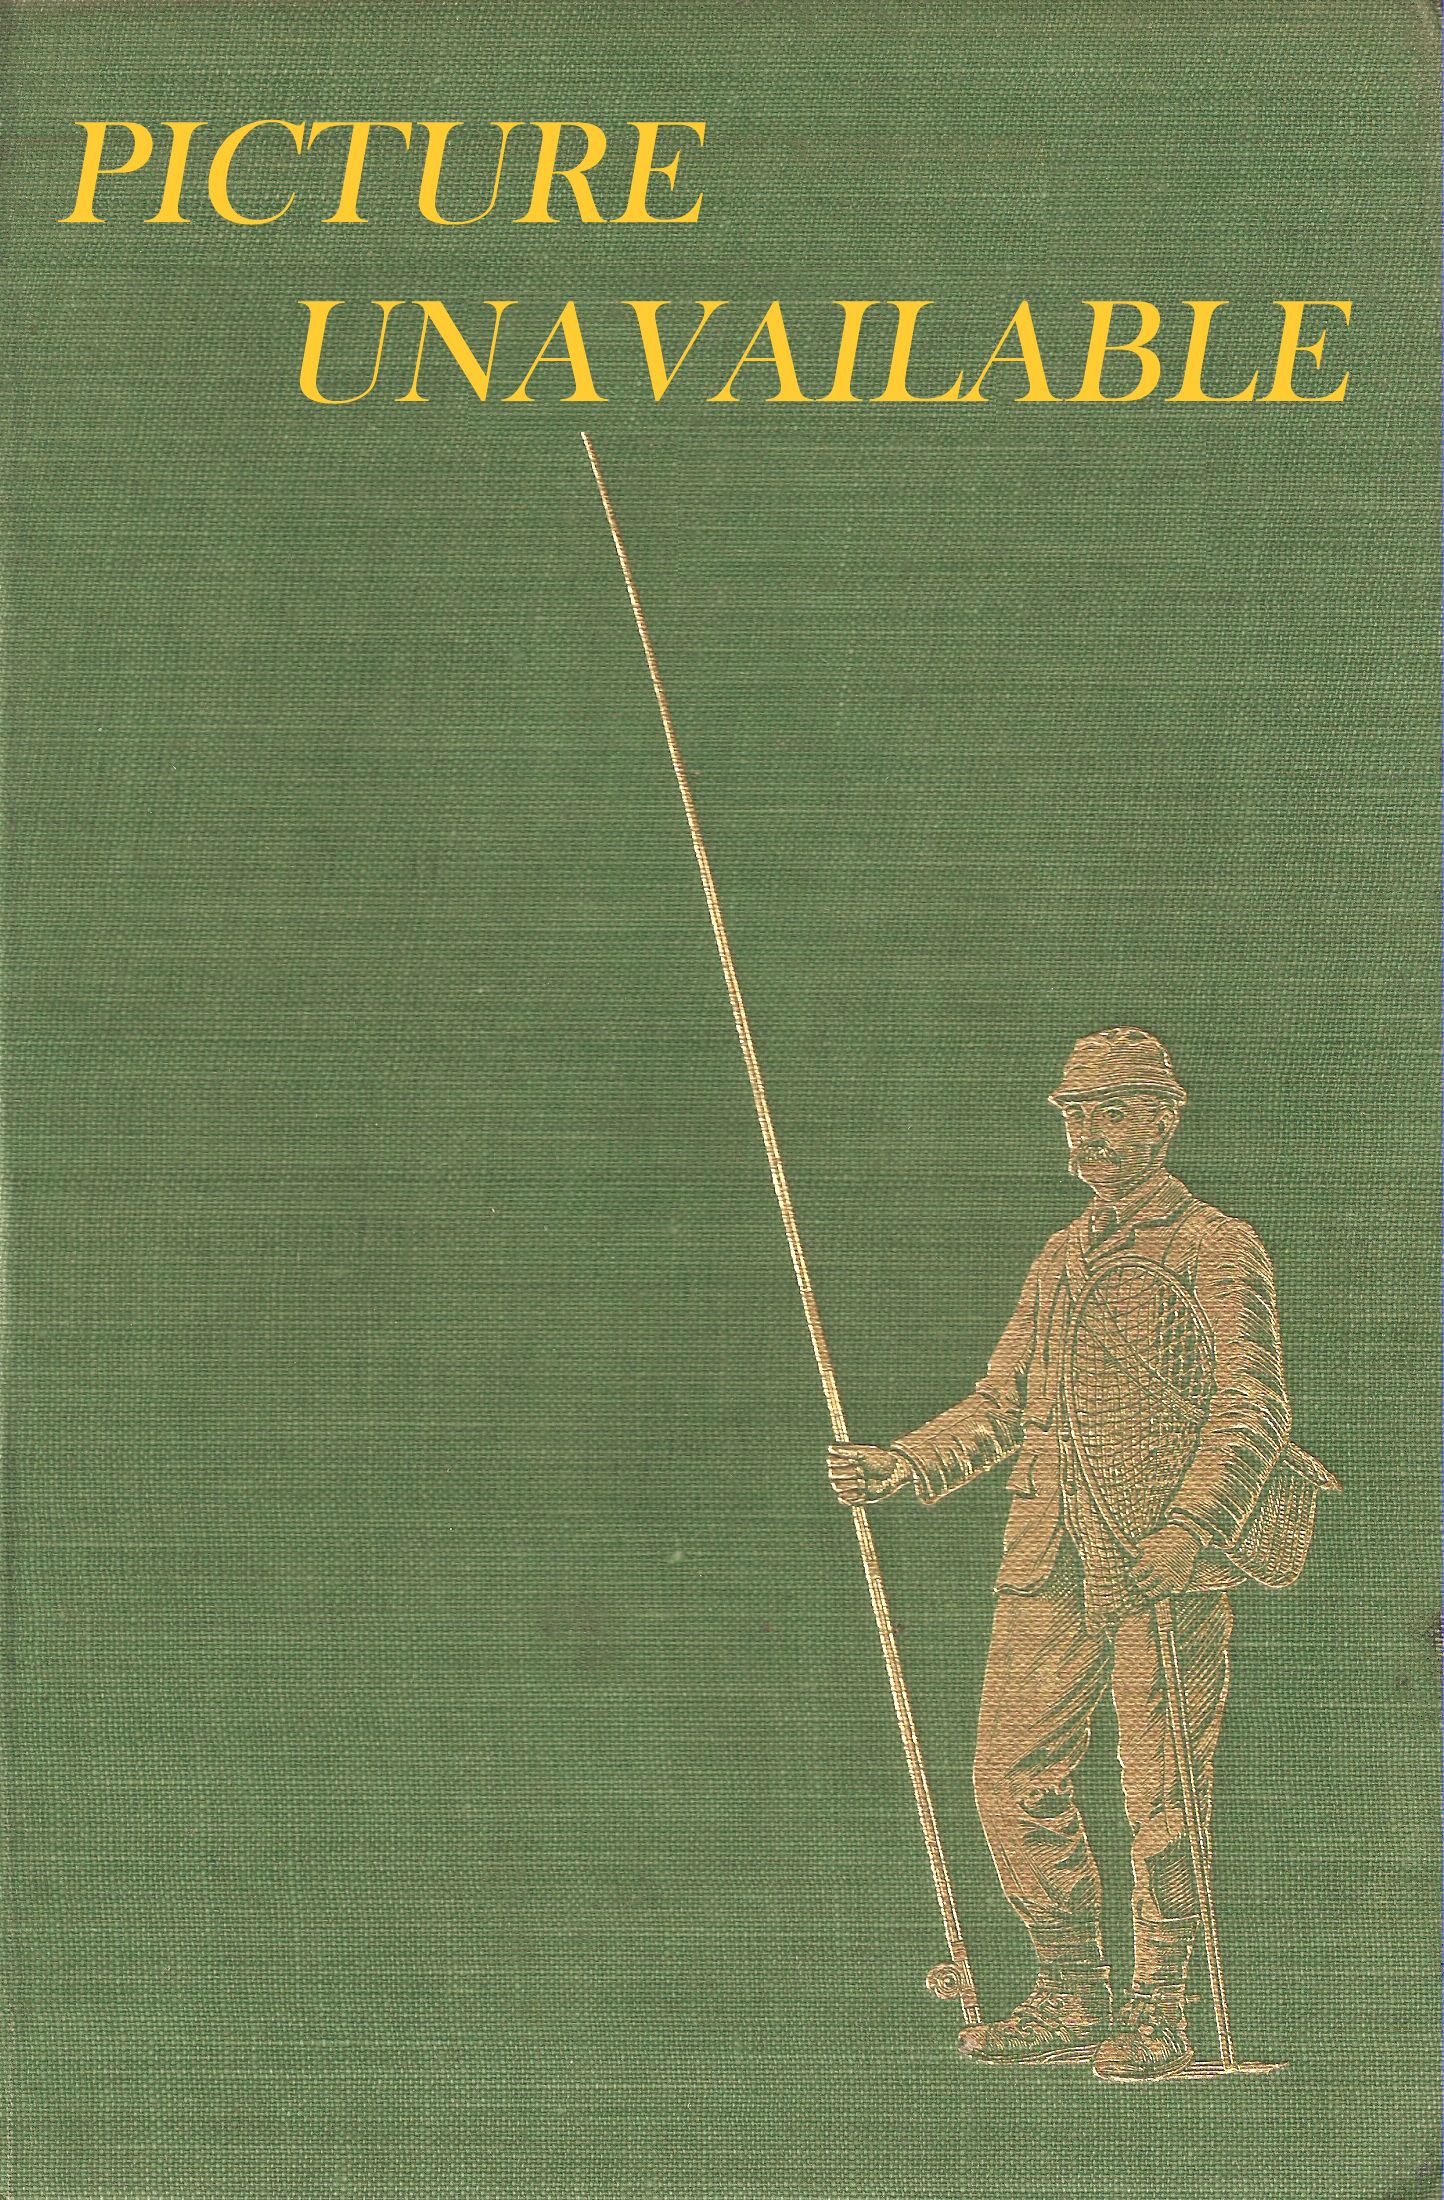 CREEL: A FISHING MAGAZINE. Volume 2, number 2. August 1964.